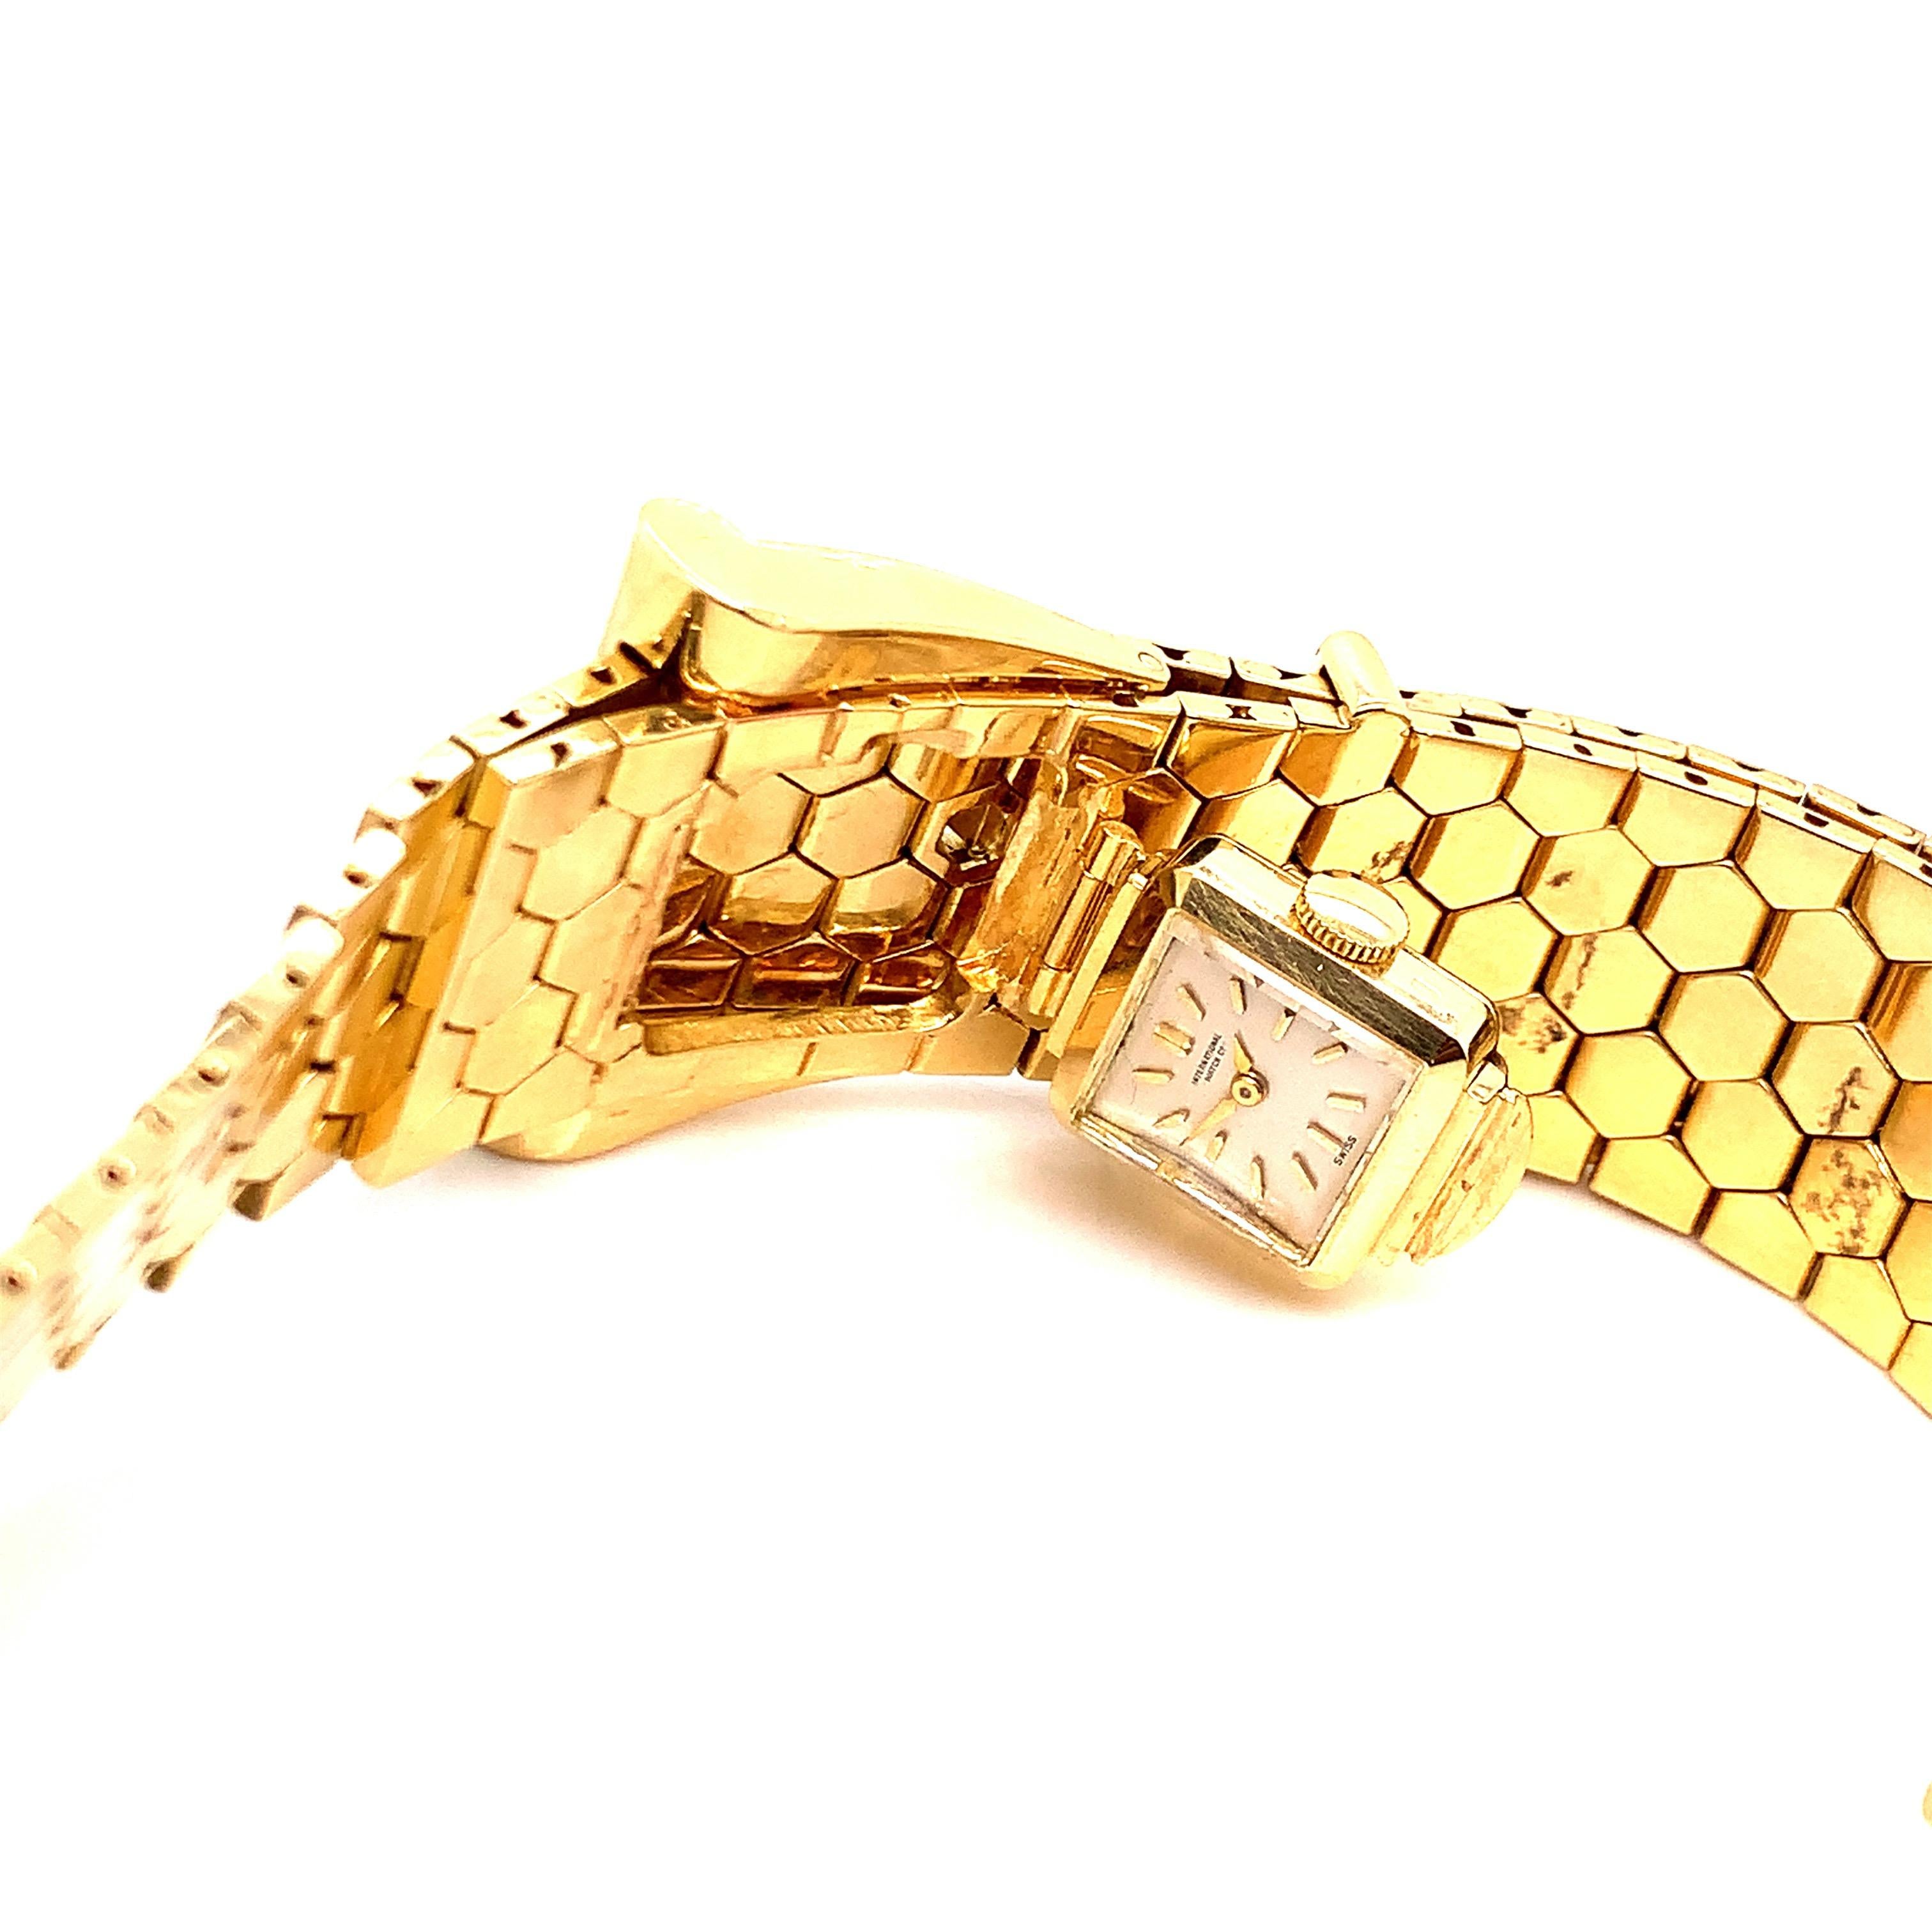 Gold Belt Buckle Wrist Watch In Excellent Condition For Sale In New York, NY